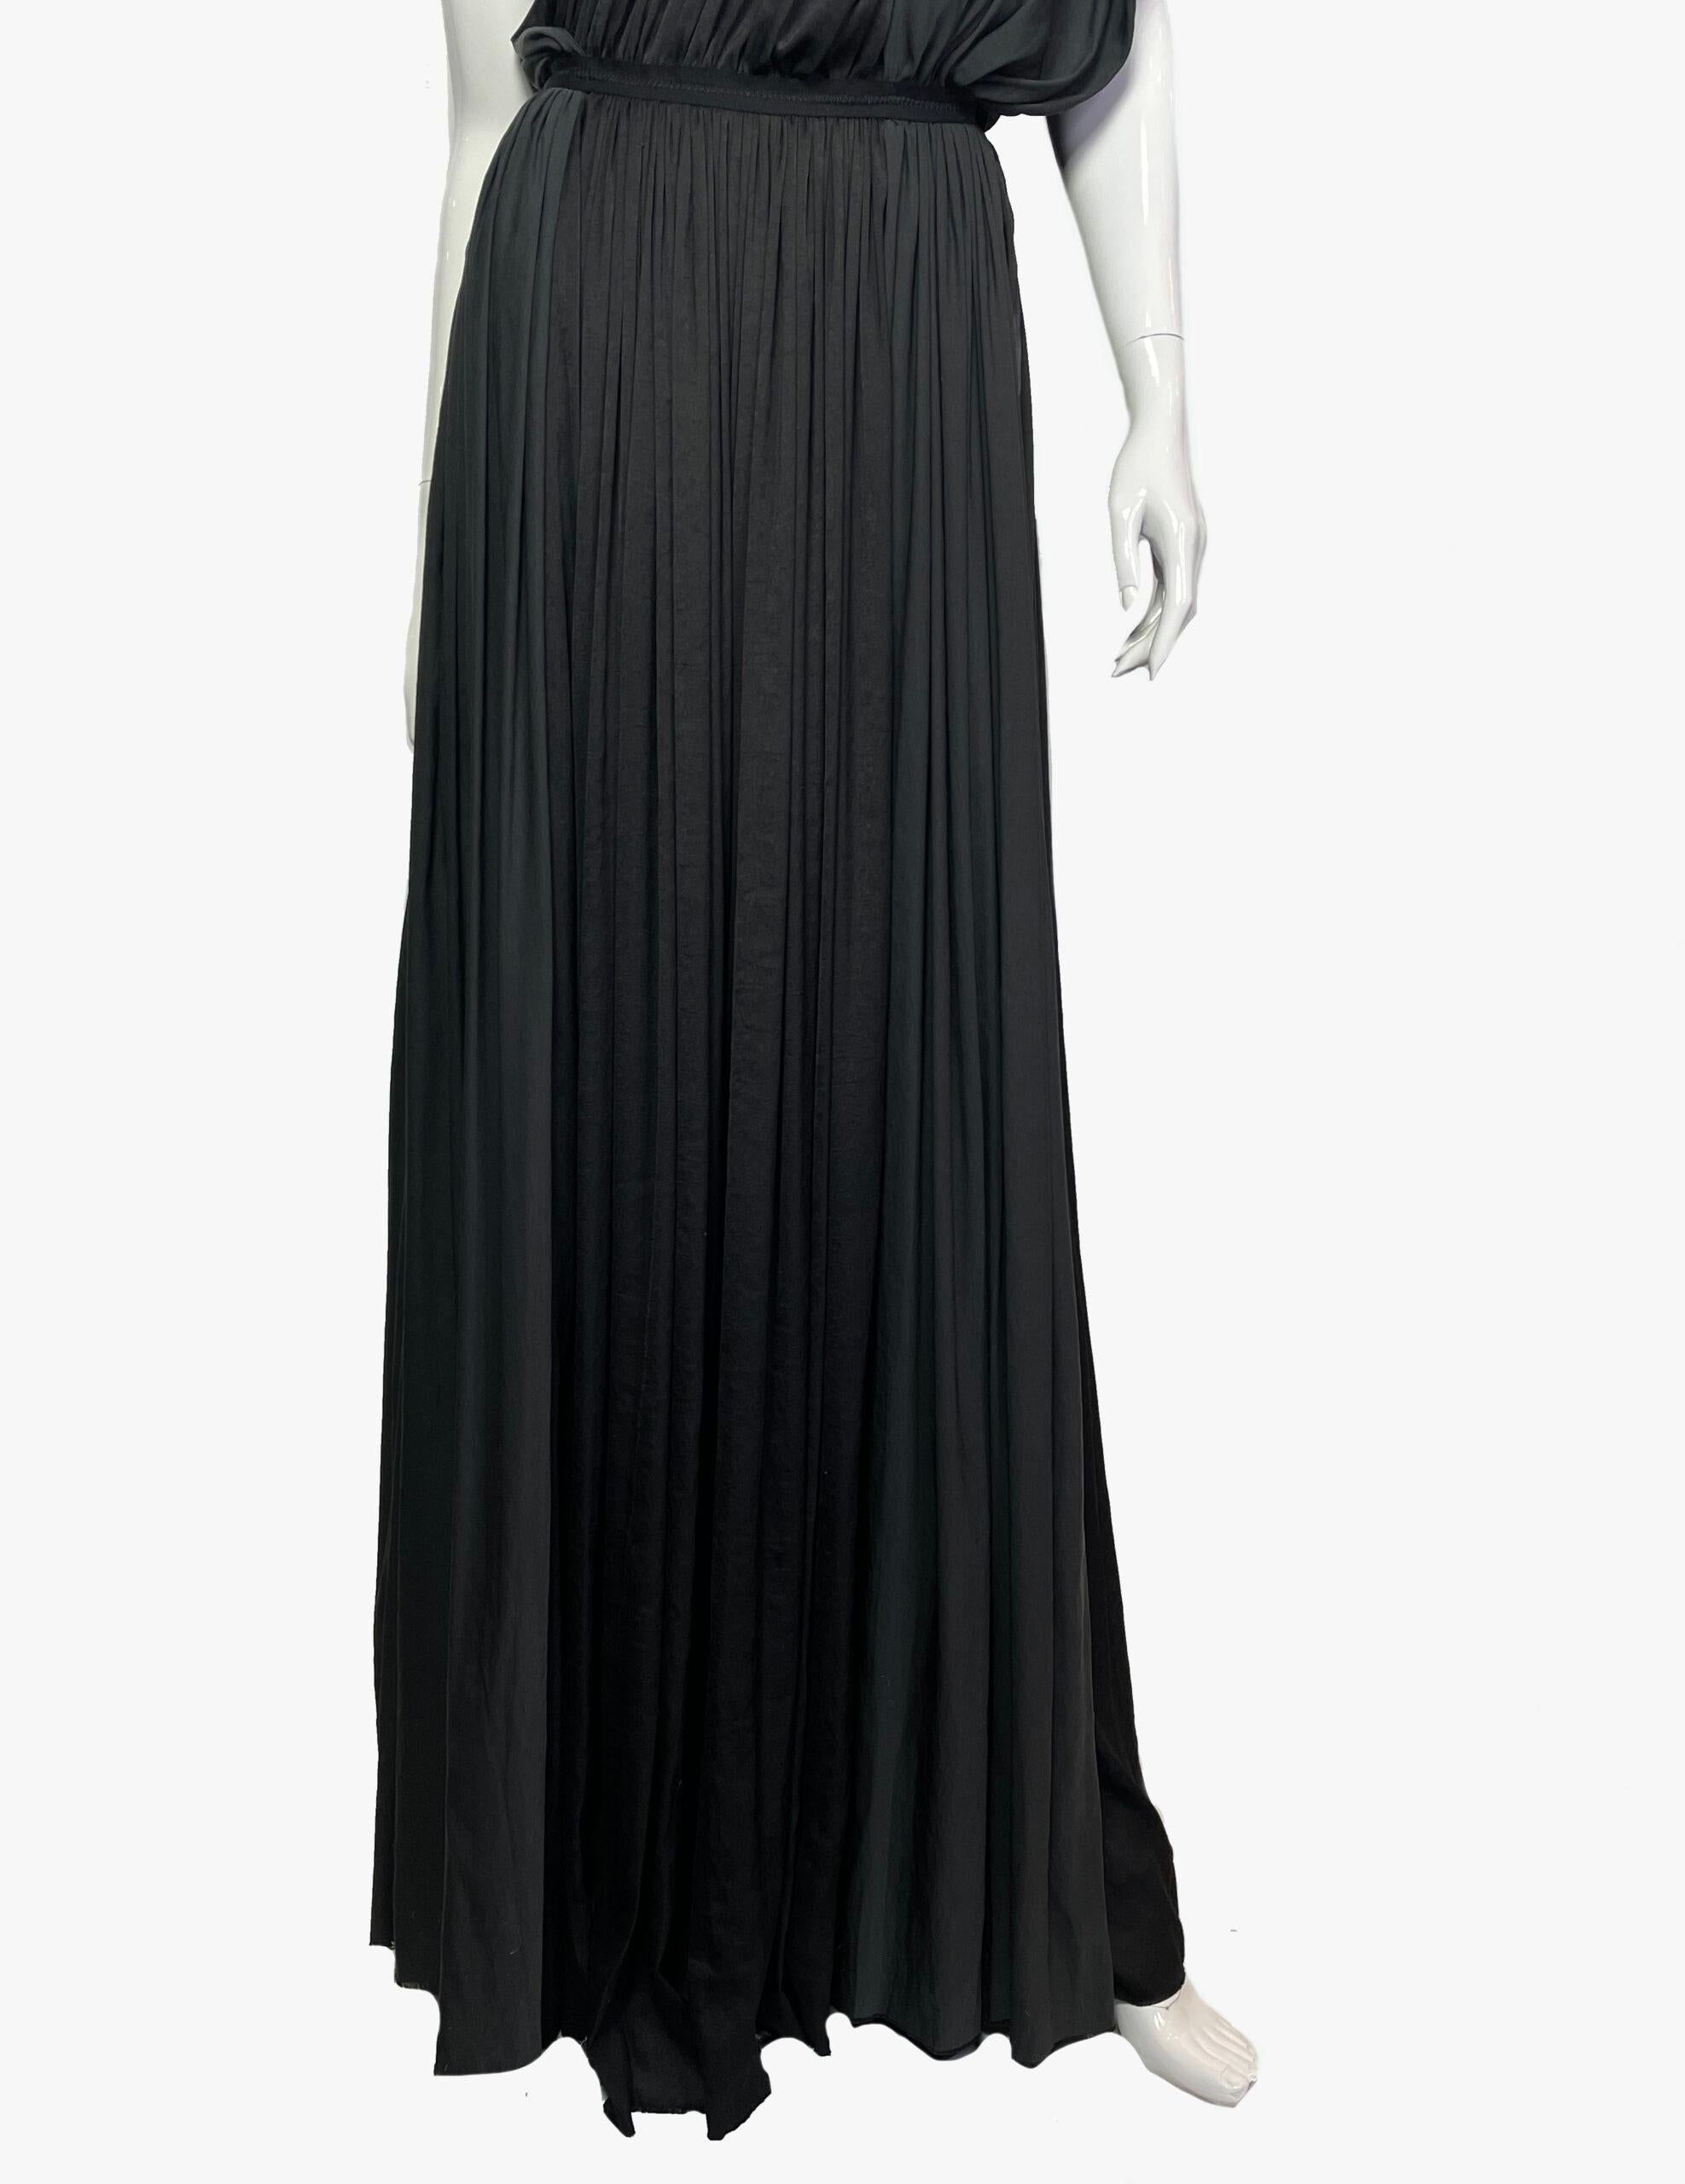 Lanvin One-shoulder Dress, 2011 In Good Condition For Sale In New York, NY